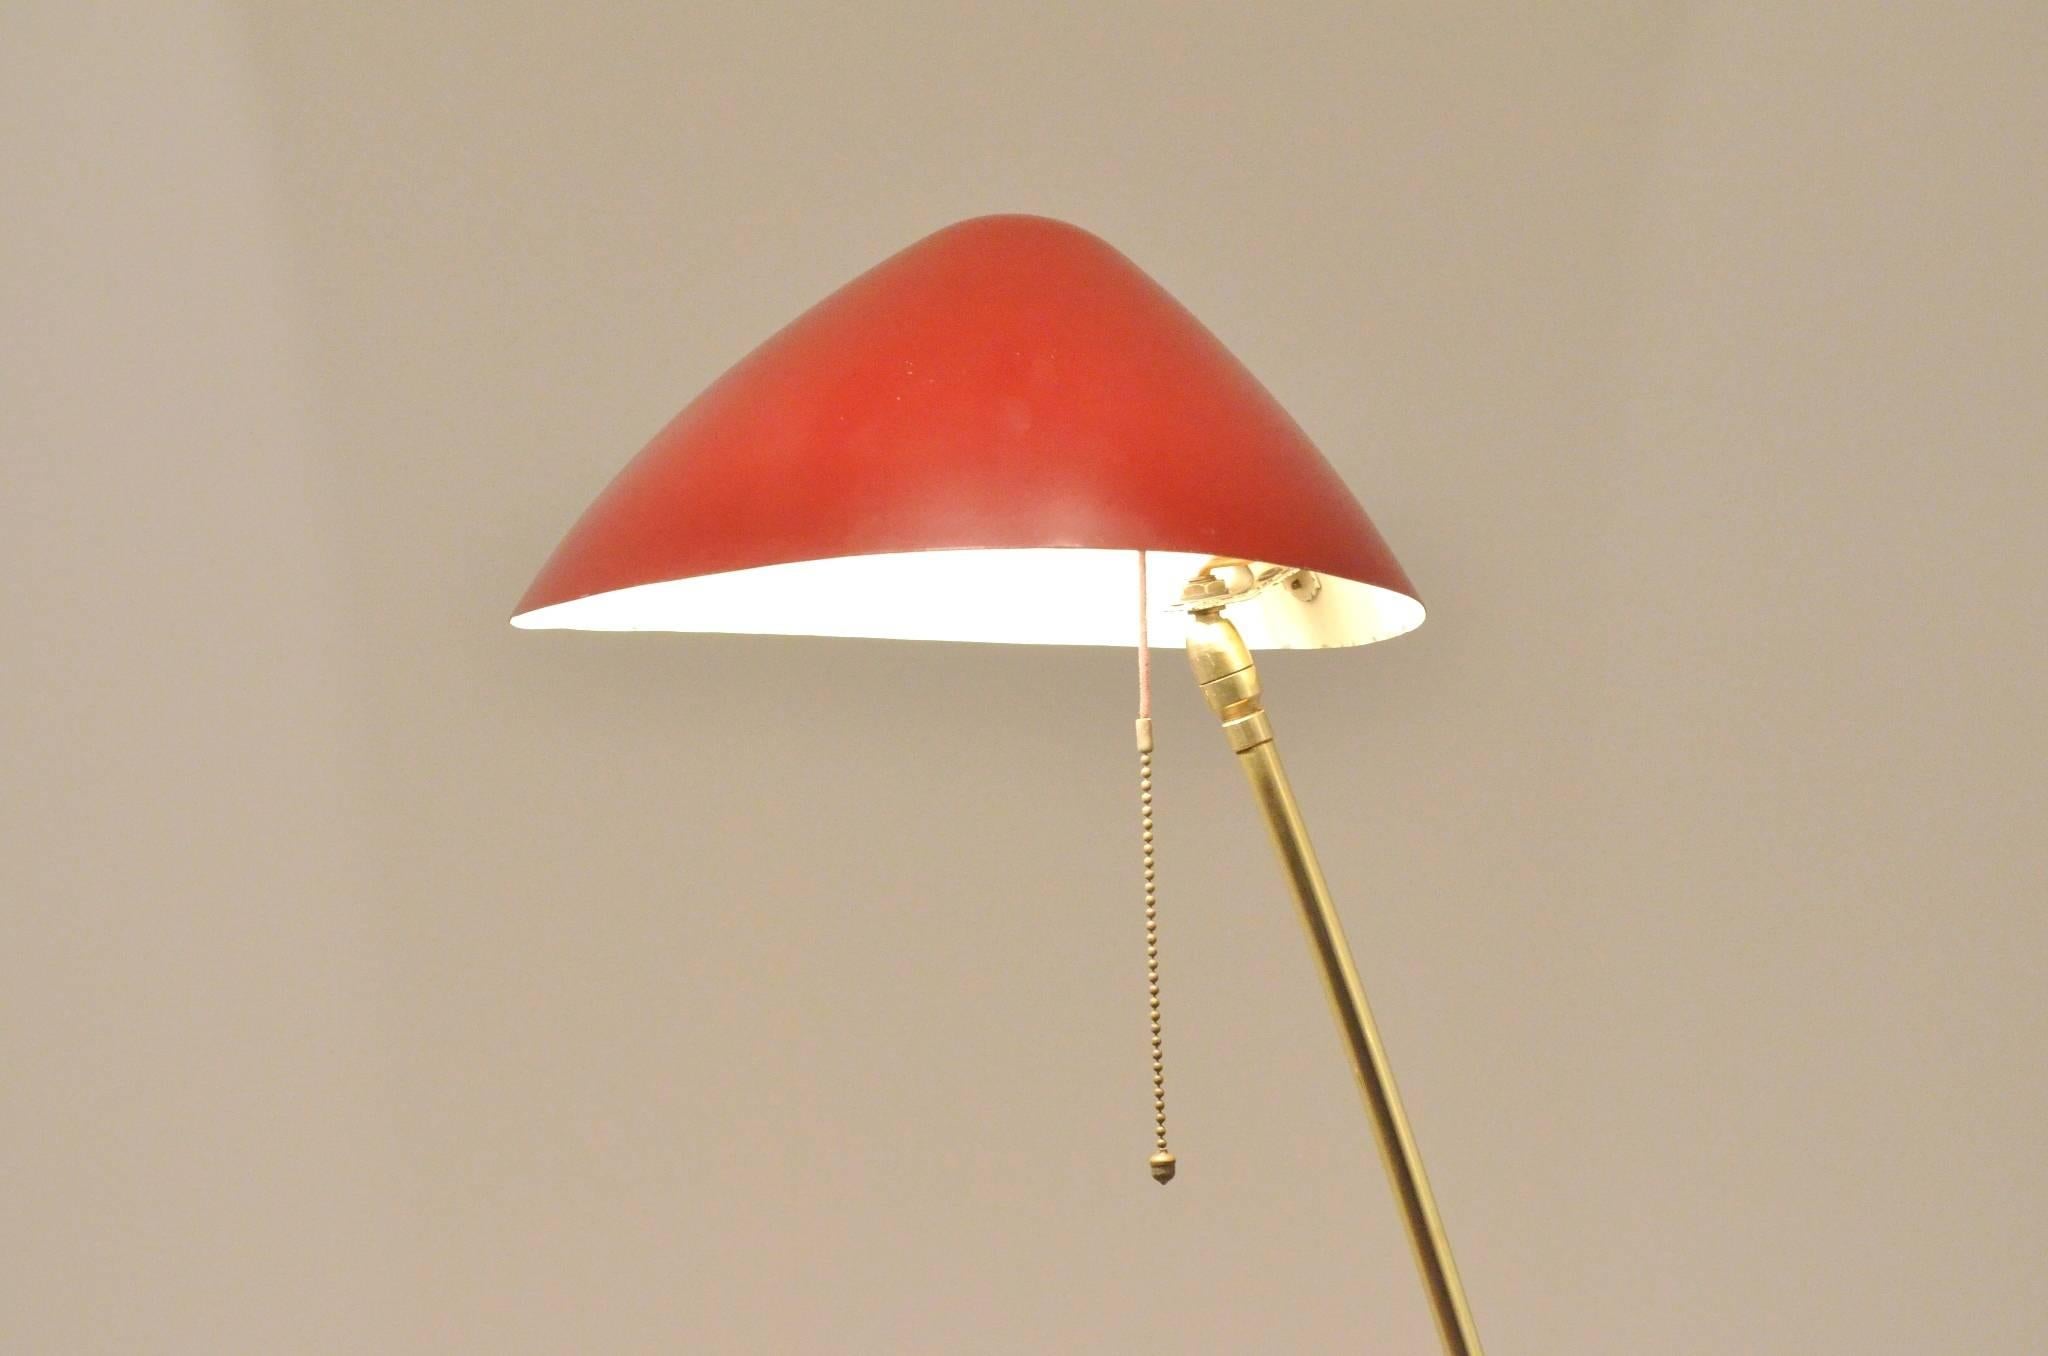 Elegant Minimalist floor lamp with a delicate brass stand with a red painted lamp shade and original brass chain light switch.